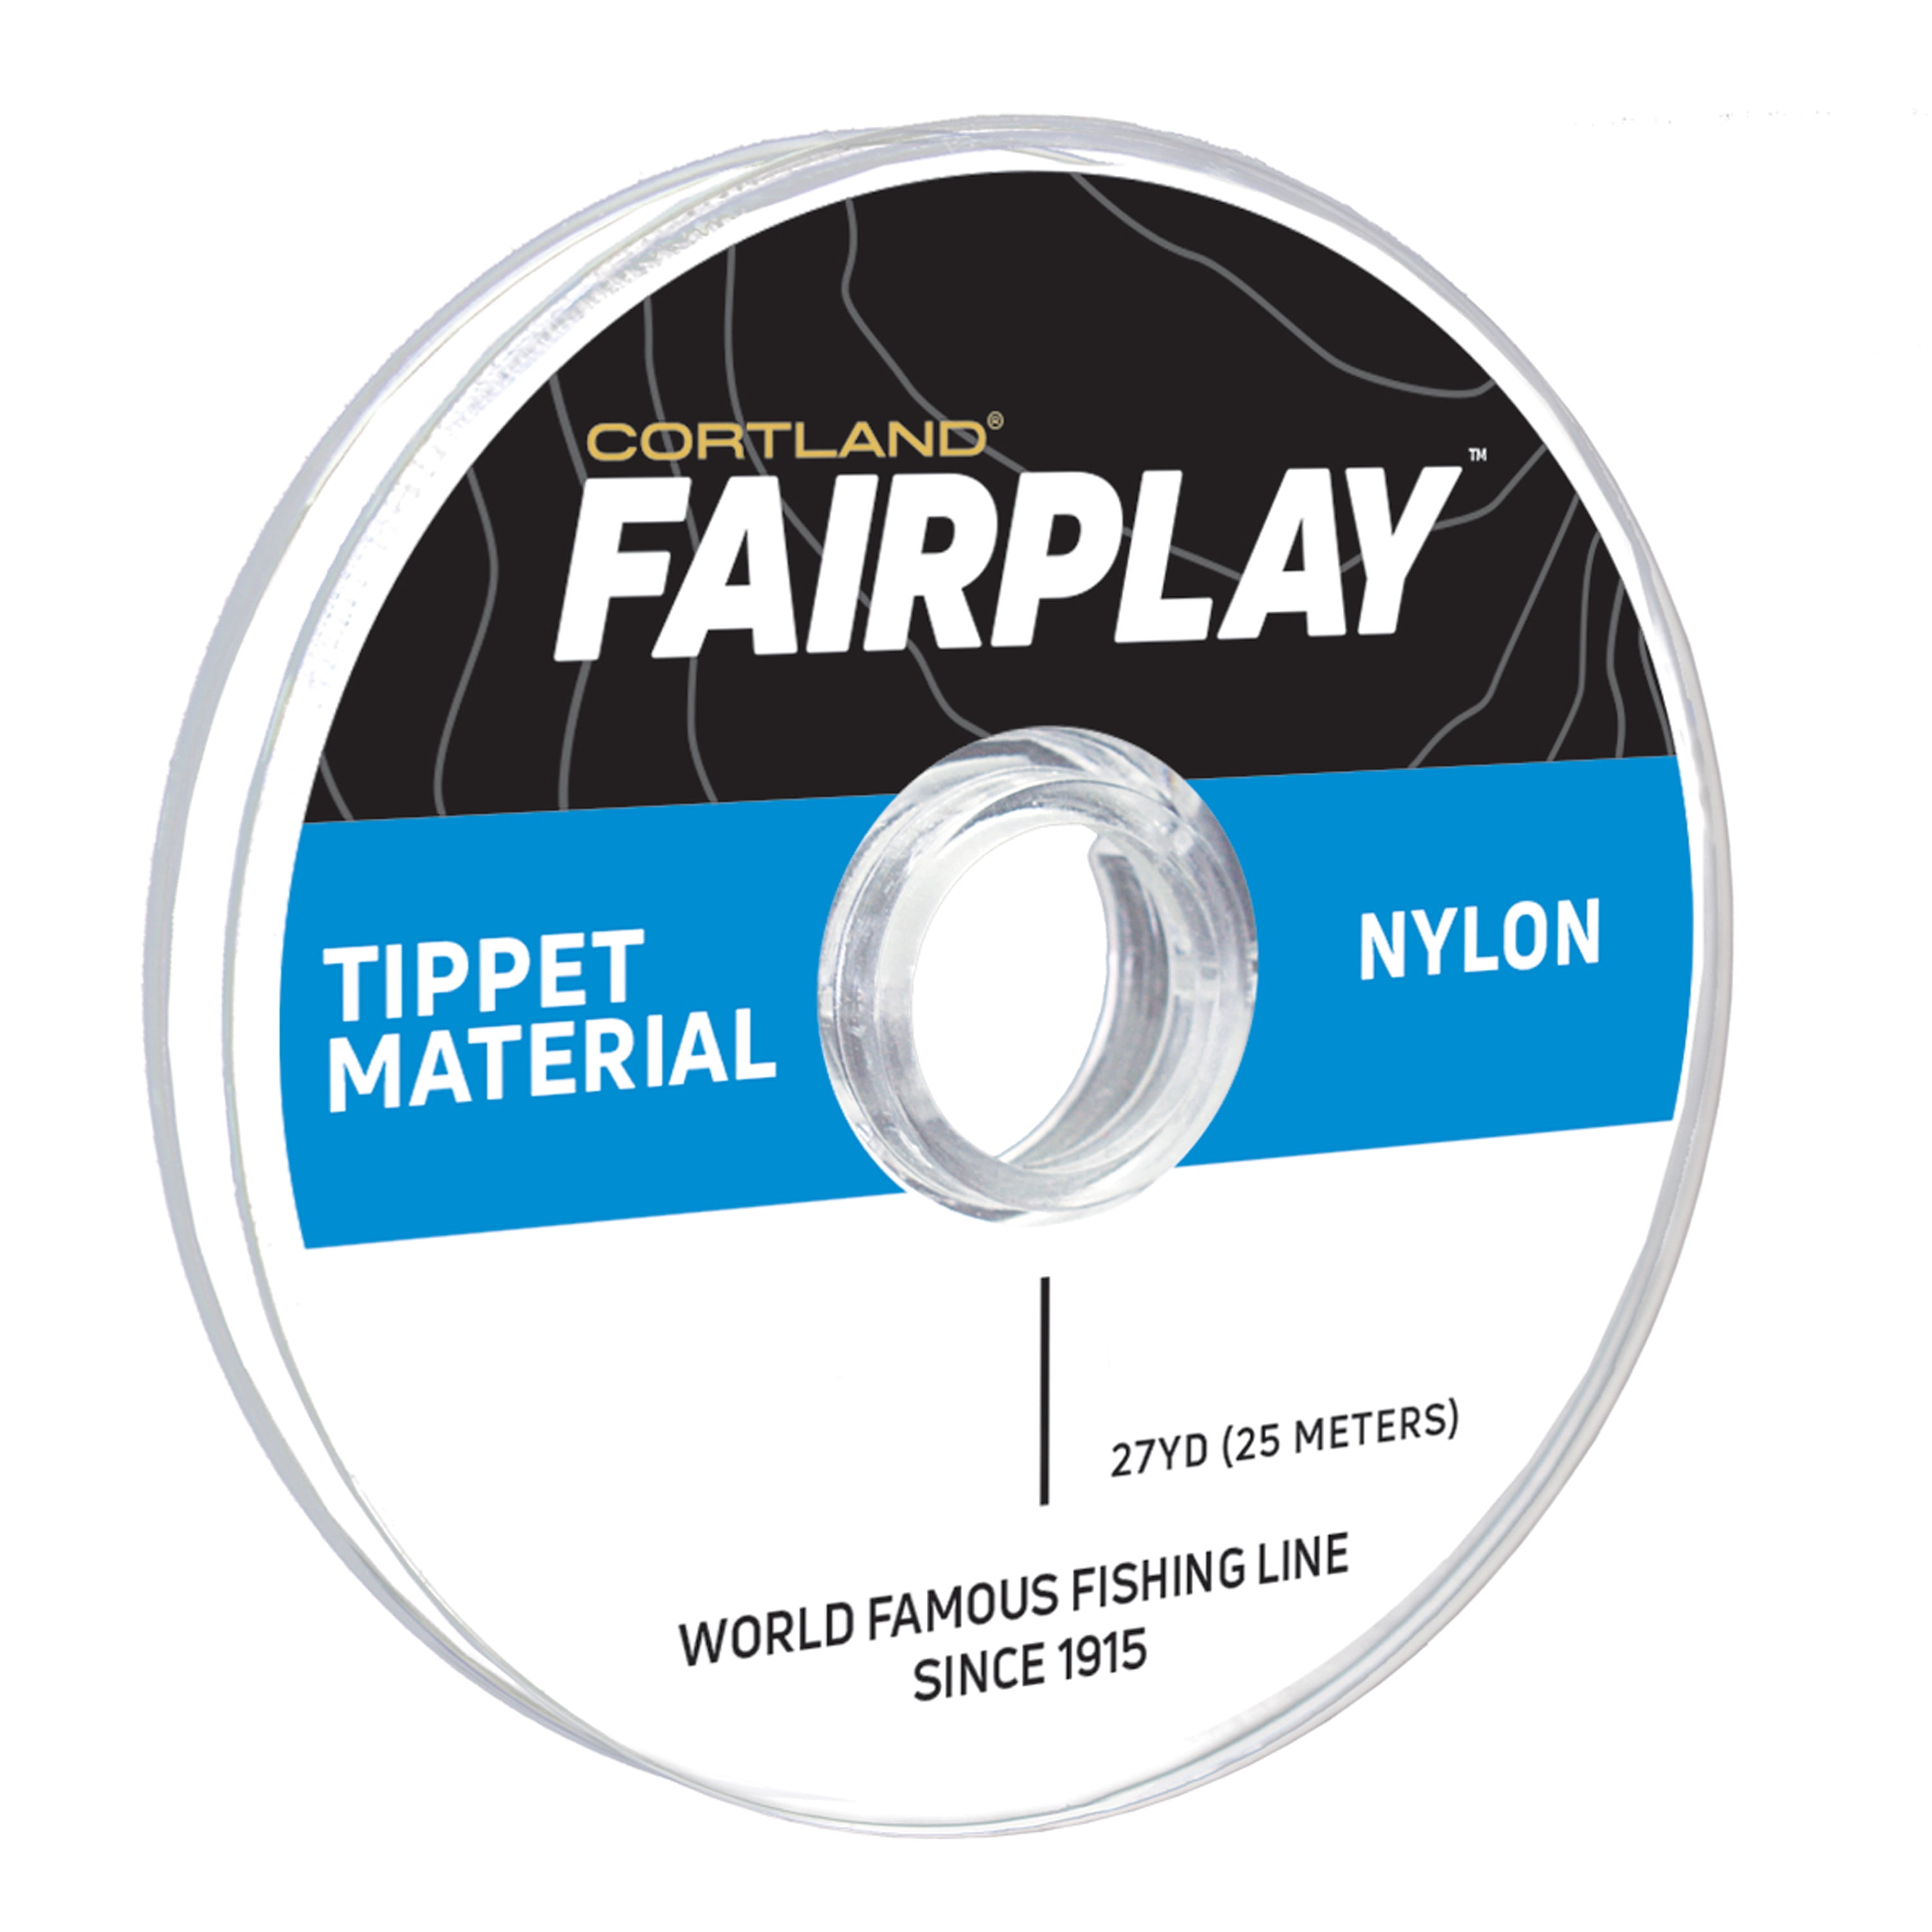 Cortland Fairplay Nylon Monofilament Fly Fishing Tippet Material